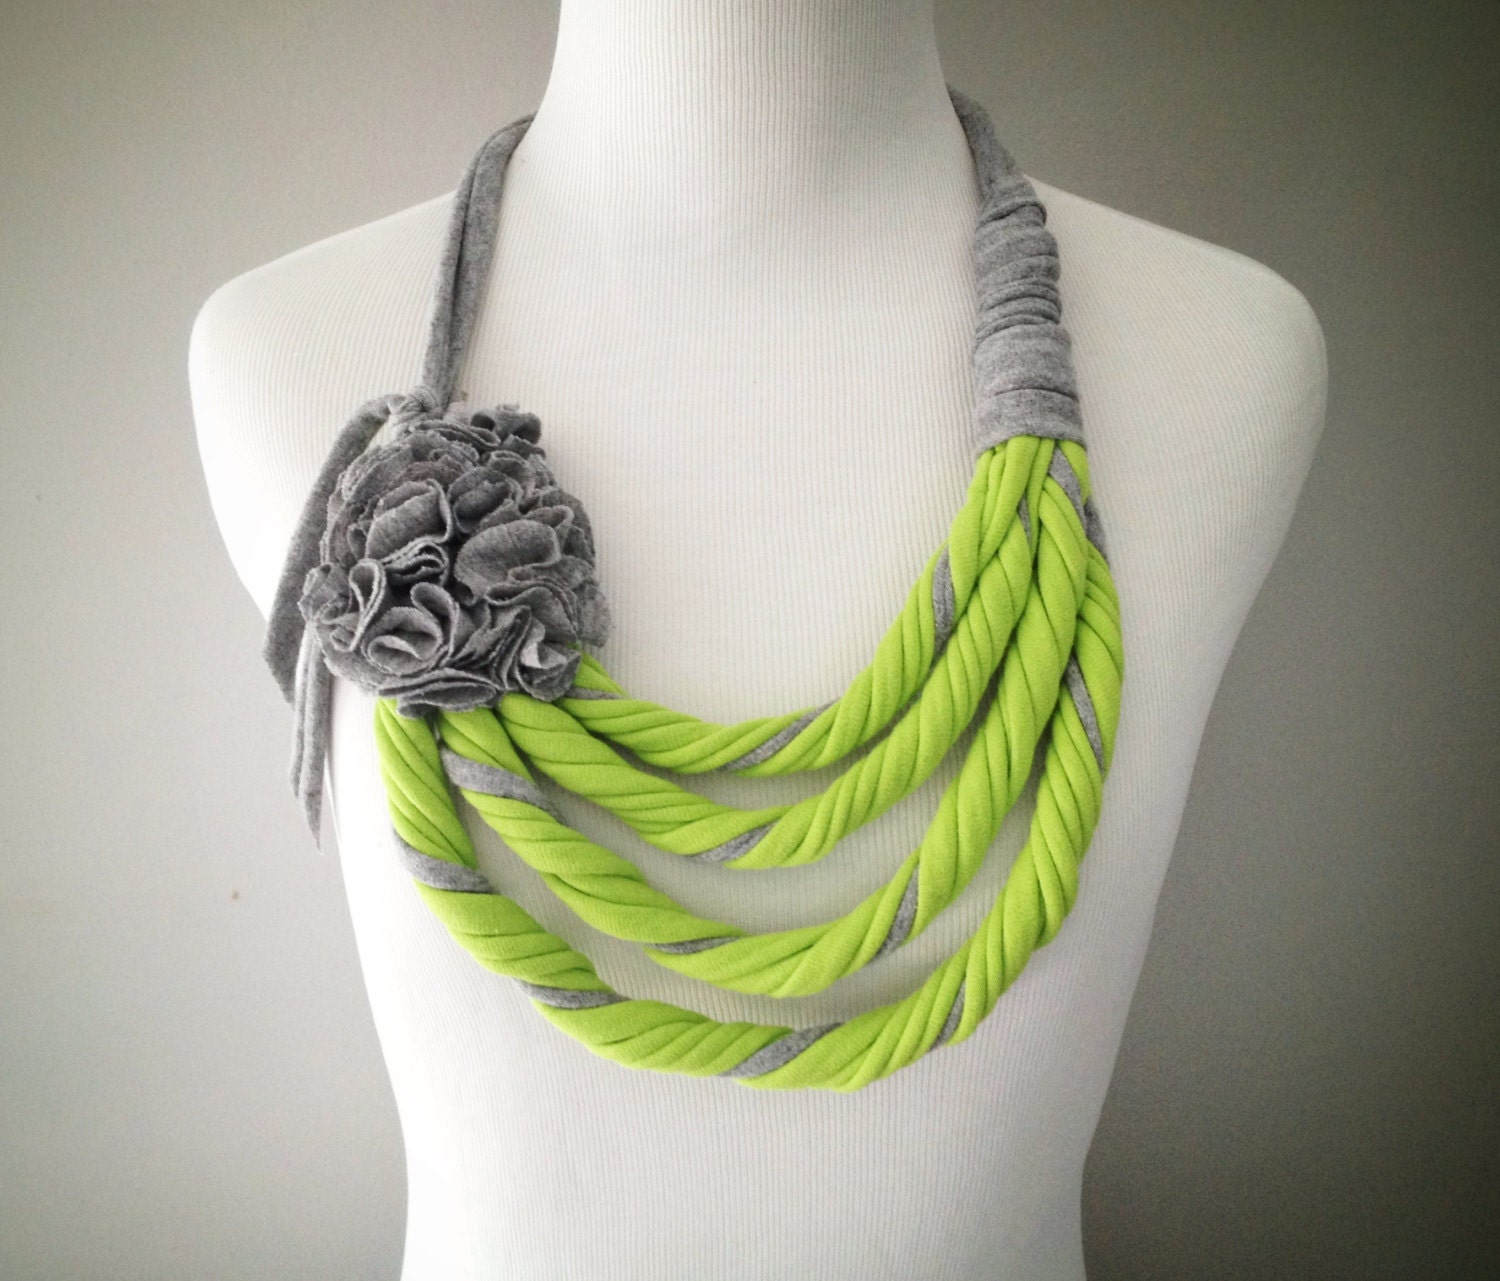 Lime Green & Grey Tshirt Necklace - Infinity Scarf - Asymmetrical with Flower - From Repurposed Tshirts